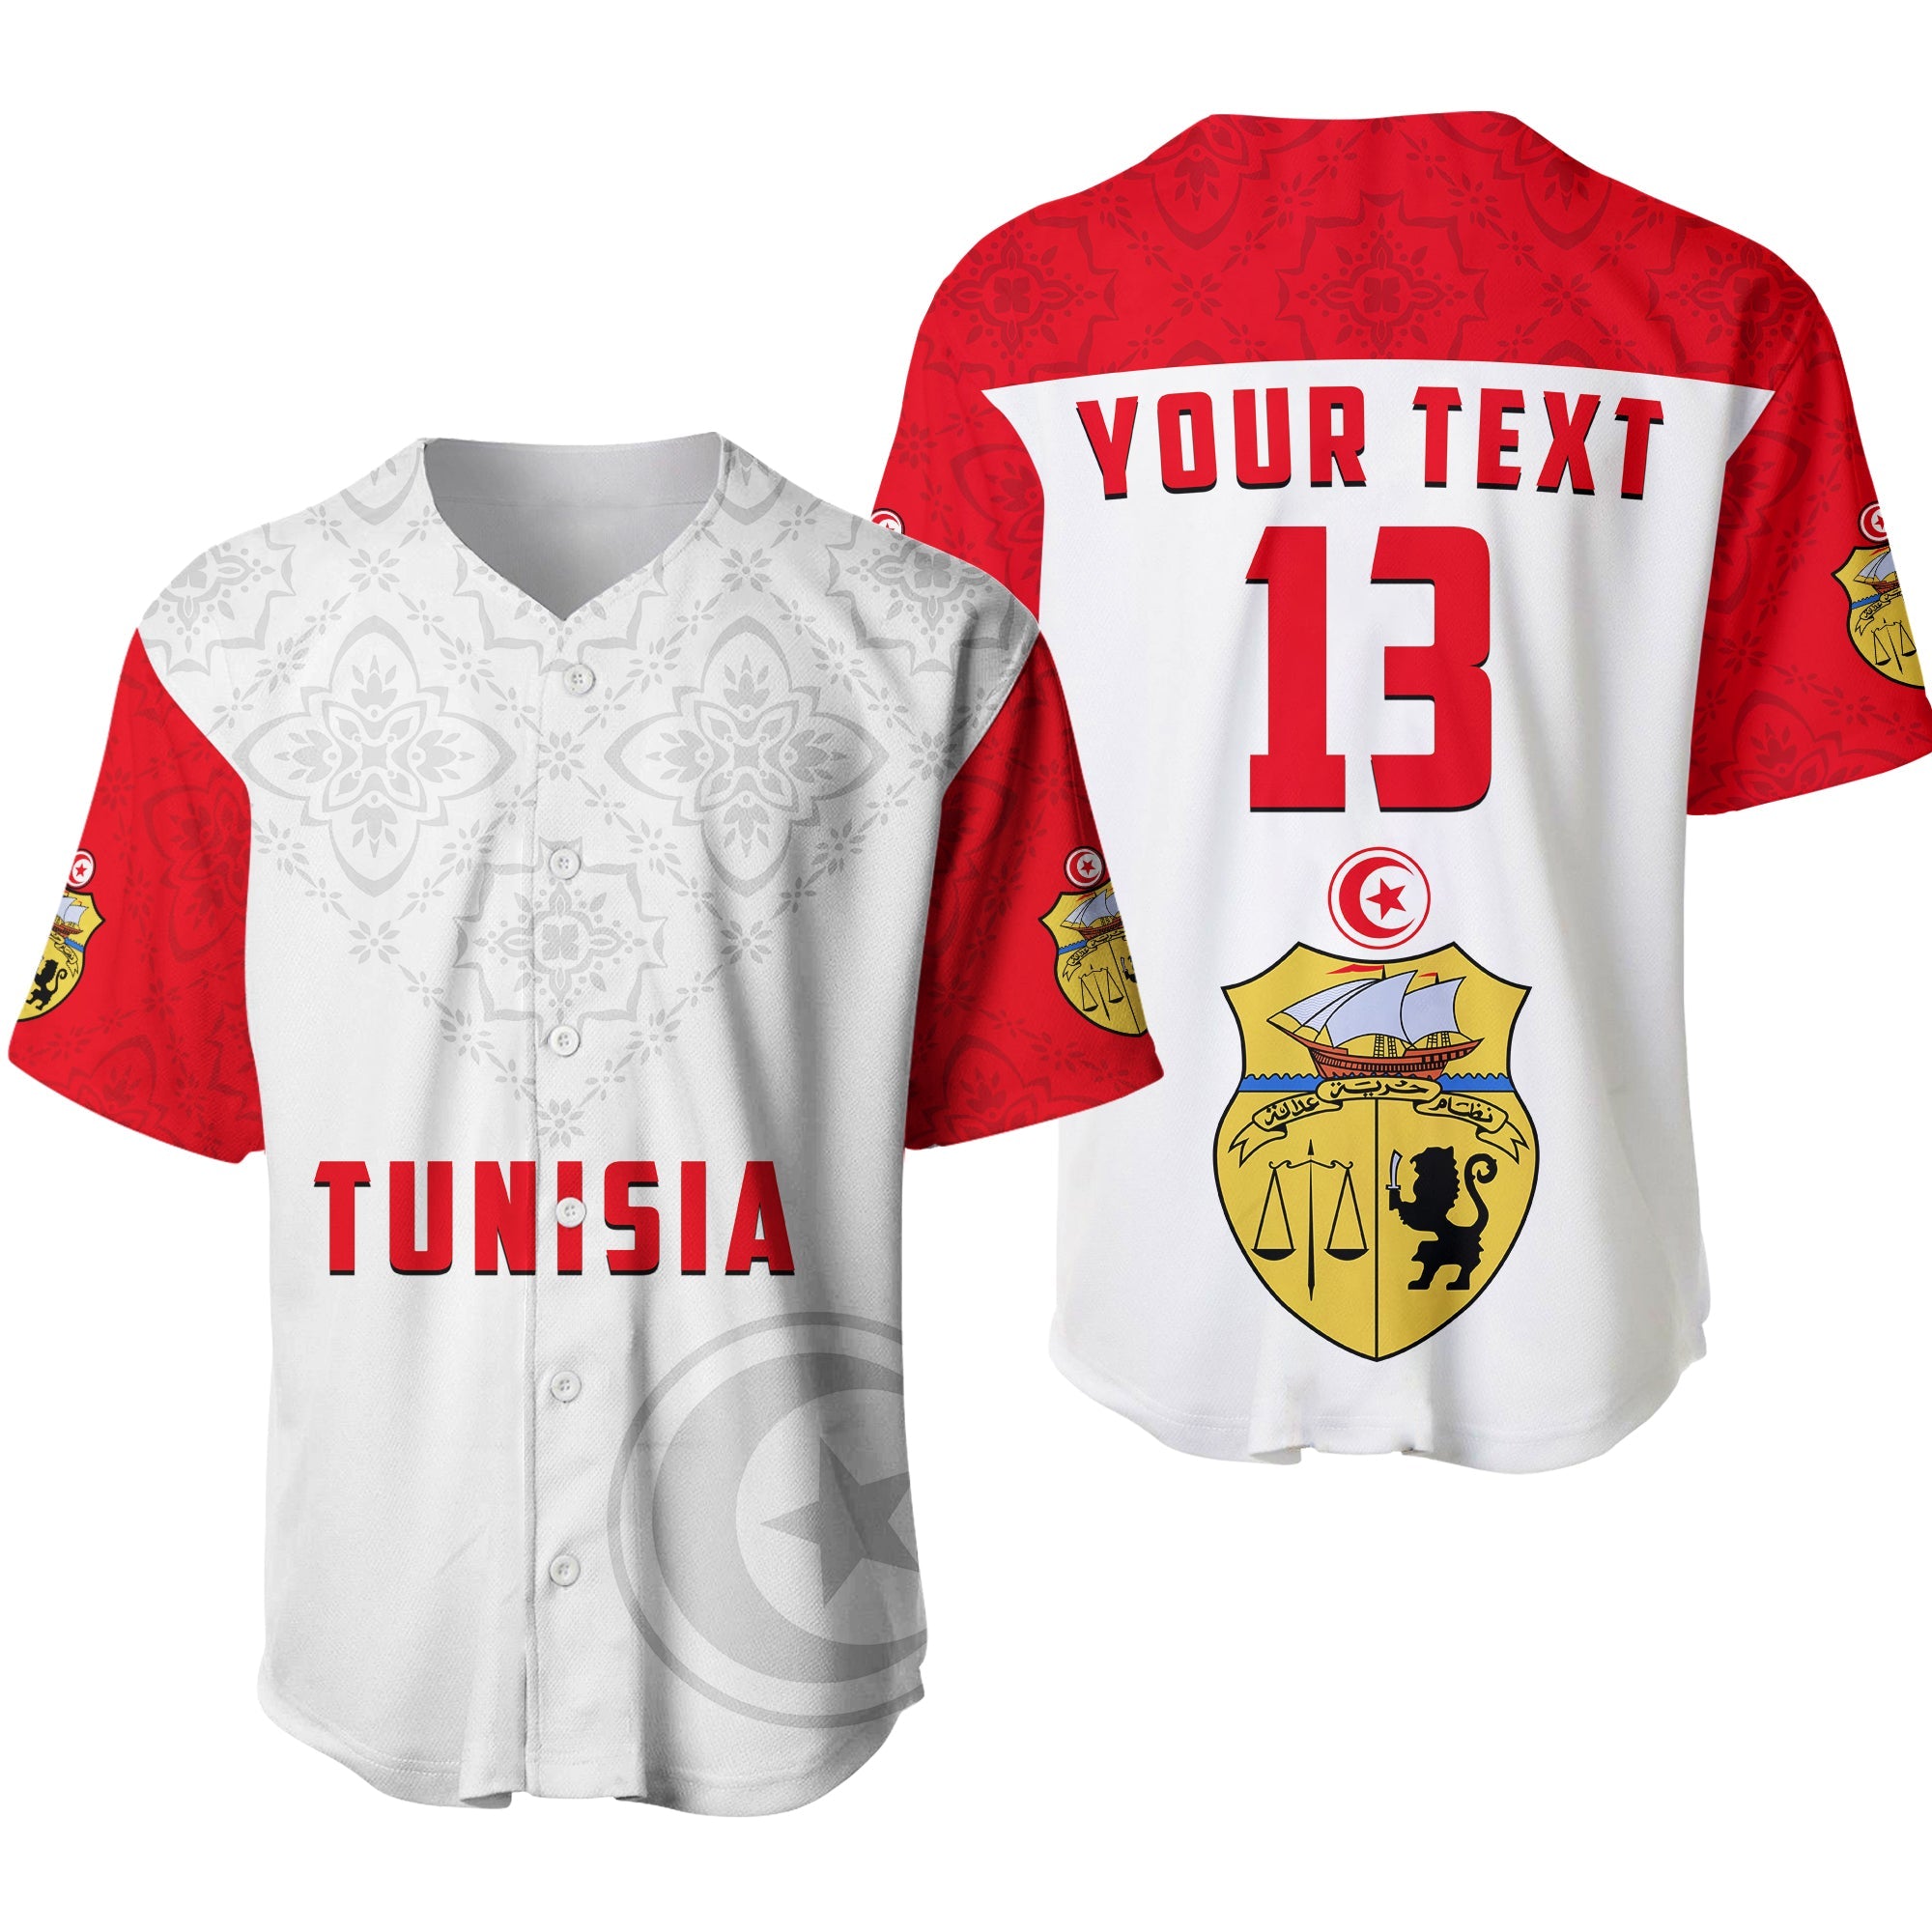 custom-text-and-number-tunisia-baseball-jersey-tunisian-patterns-sporty-style